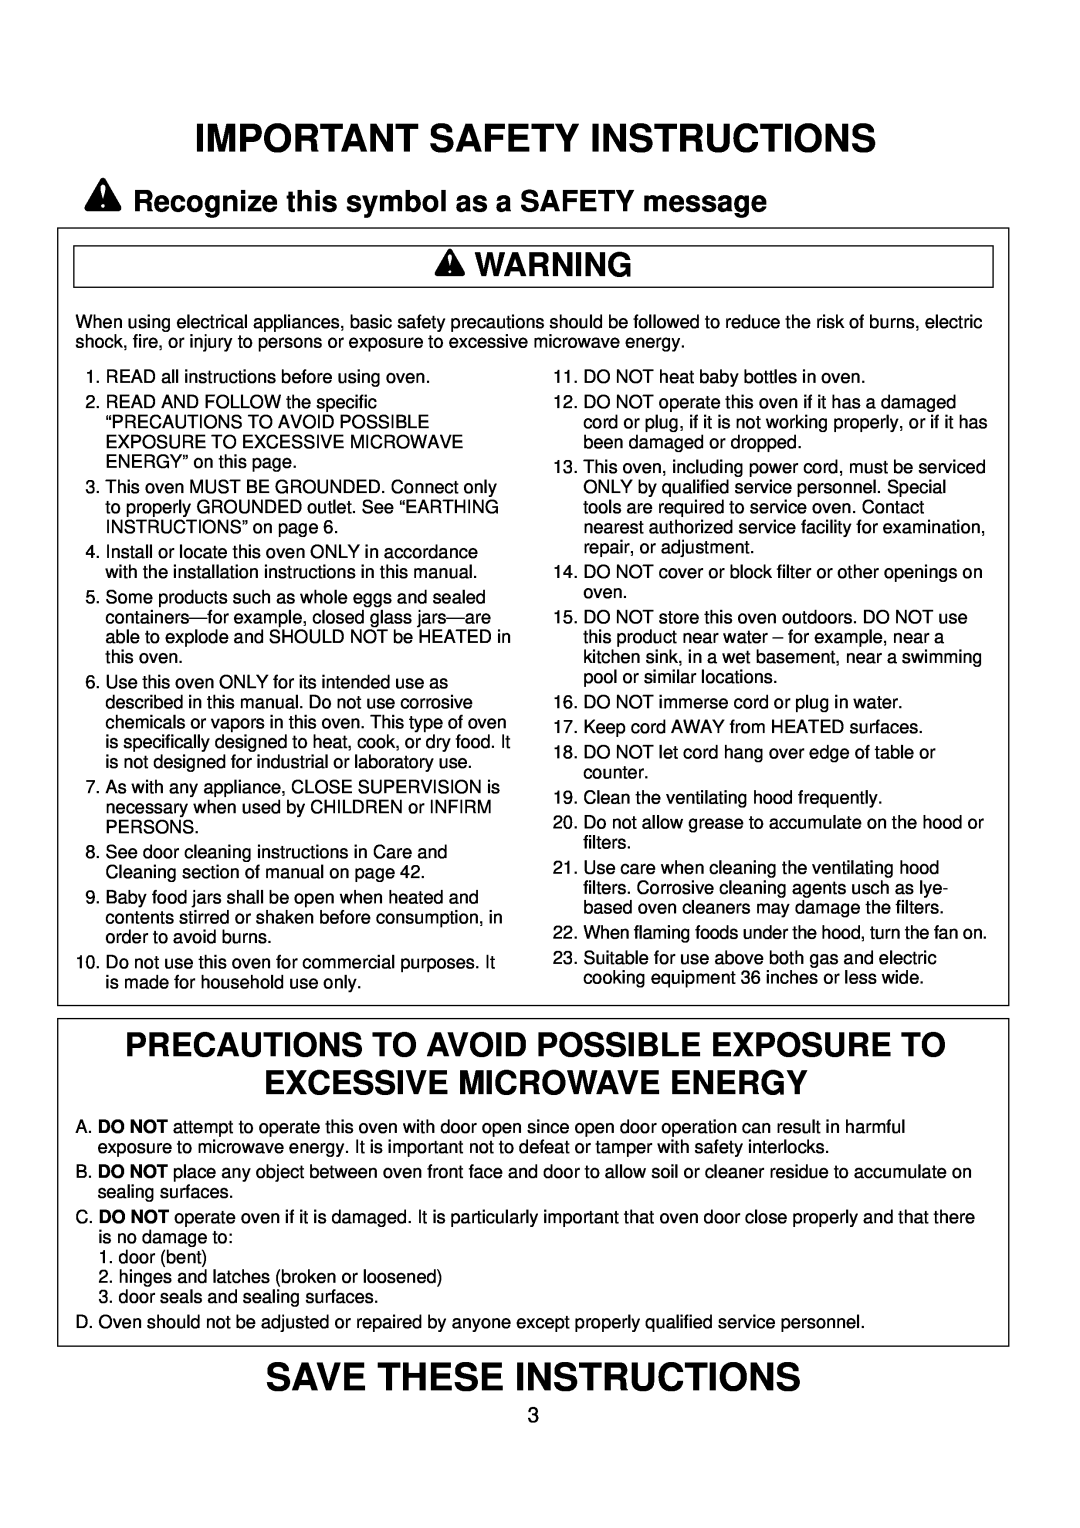 Amana ACO1520A Important Safety Instructions, Save These Instructions, Precautions To Avoid Possible Exposure To, wWARNING 